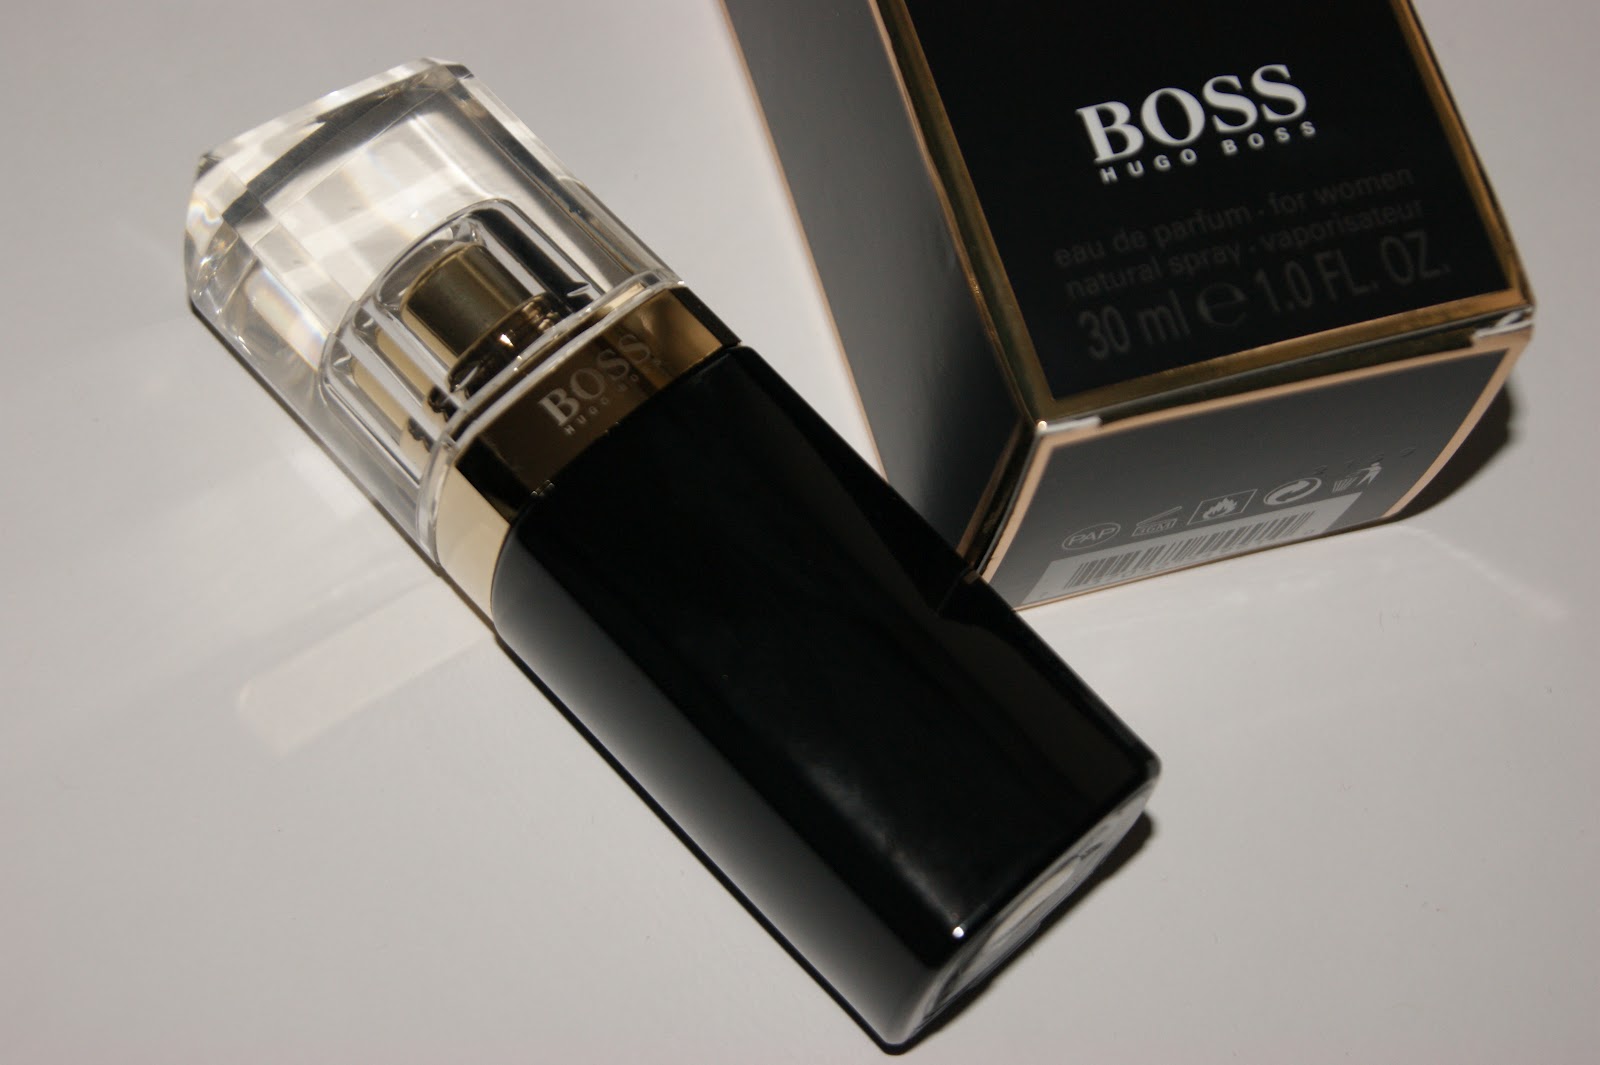 Will Your Night Boss Nuit Pour Femme | The Sunday